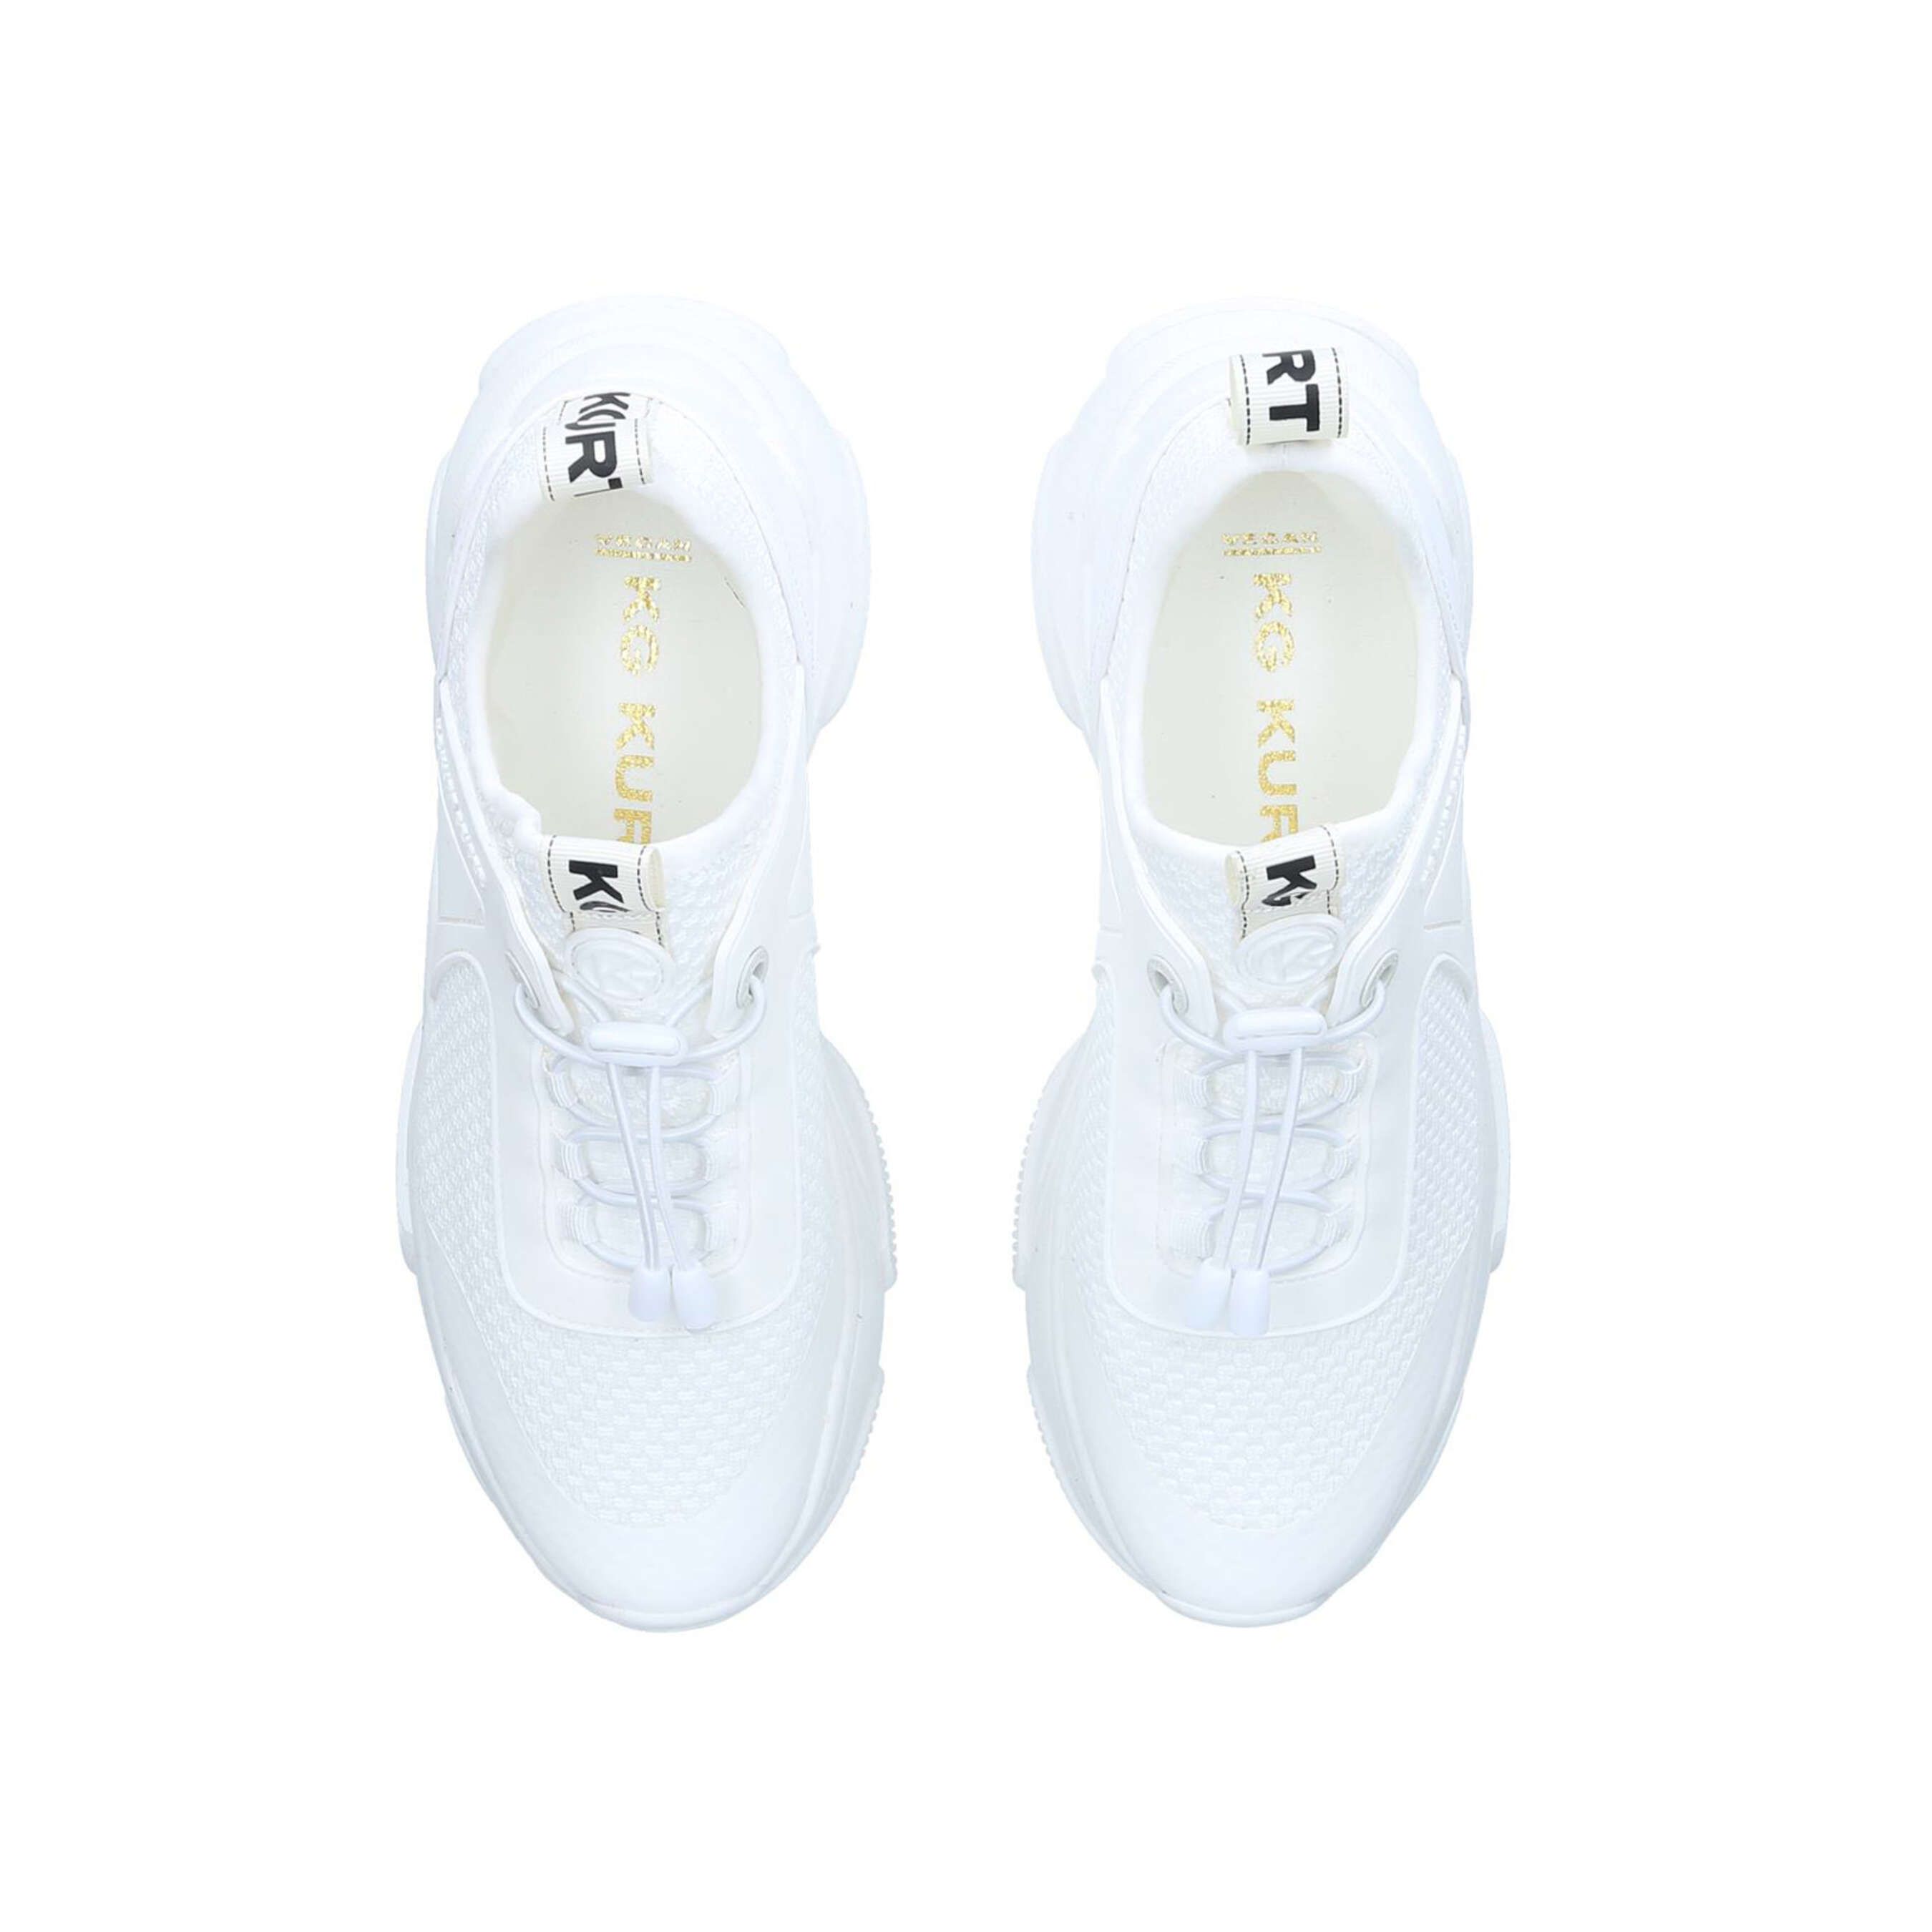 The Leighton sneaker arrives in white with toggle tied laces. The KG Kurt Geiger logo printed on ribbed textile with a print stitch detailing is seen at the ankle with a rubber monocle which features the embossed KG Kurt Geiger logo.